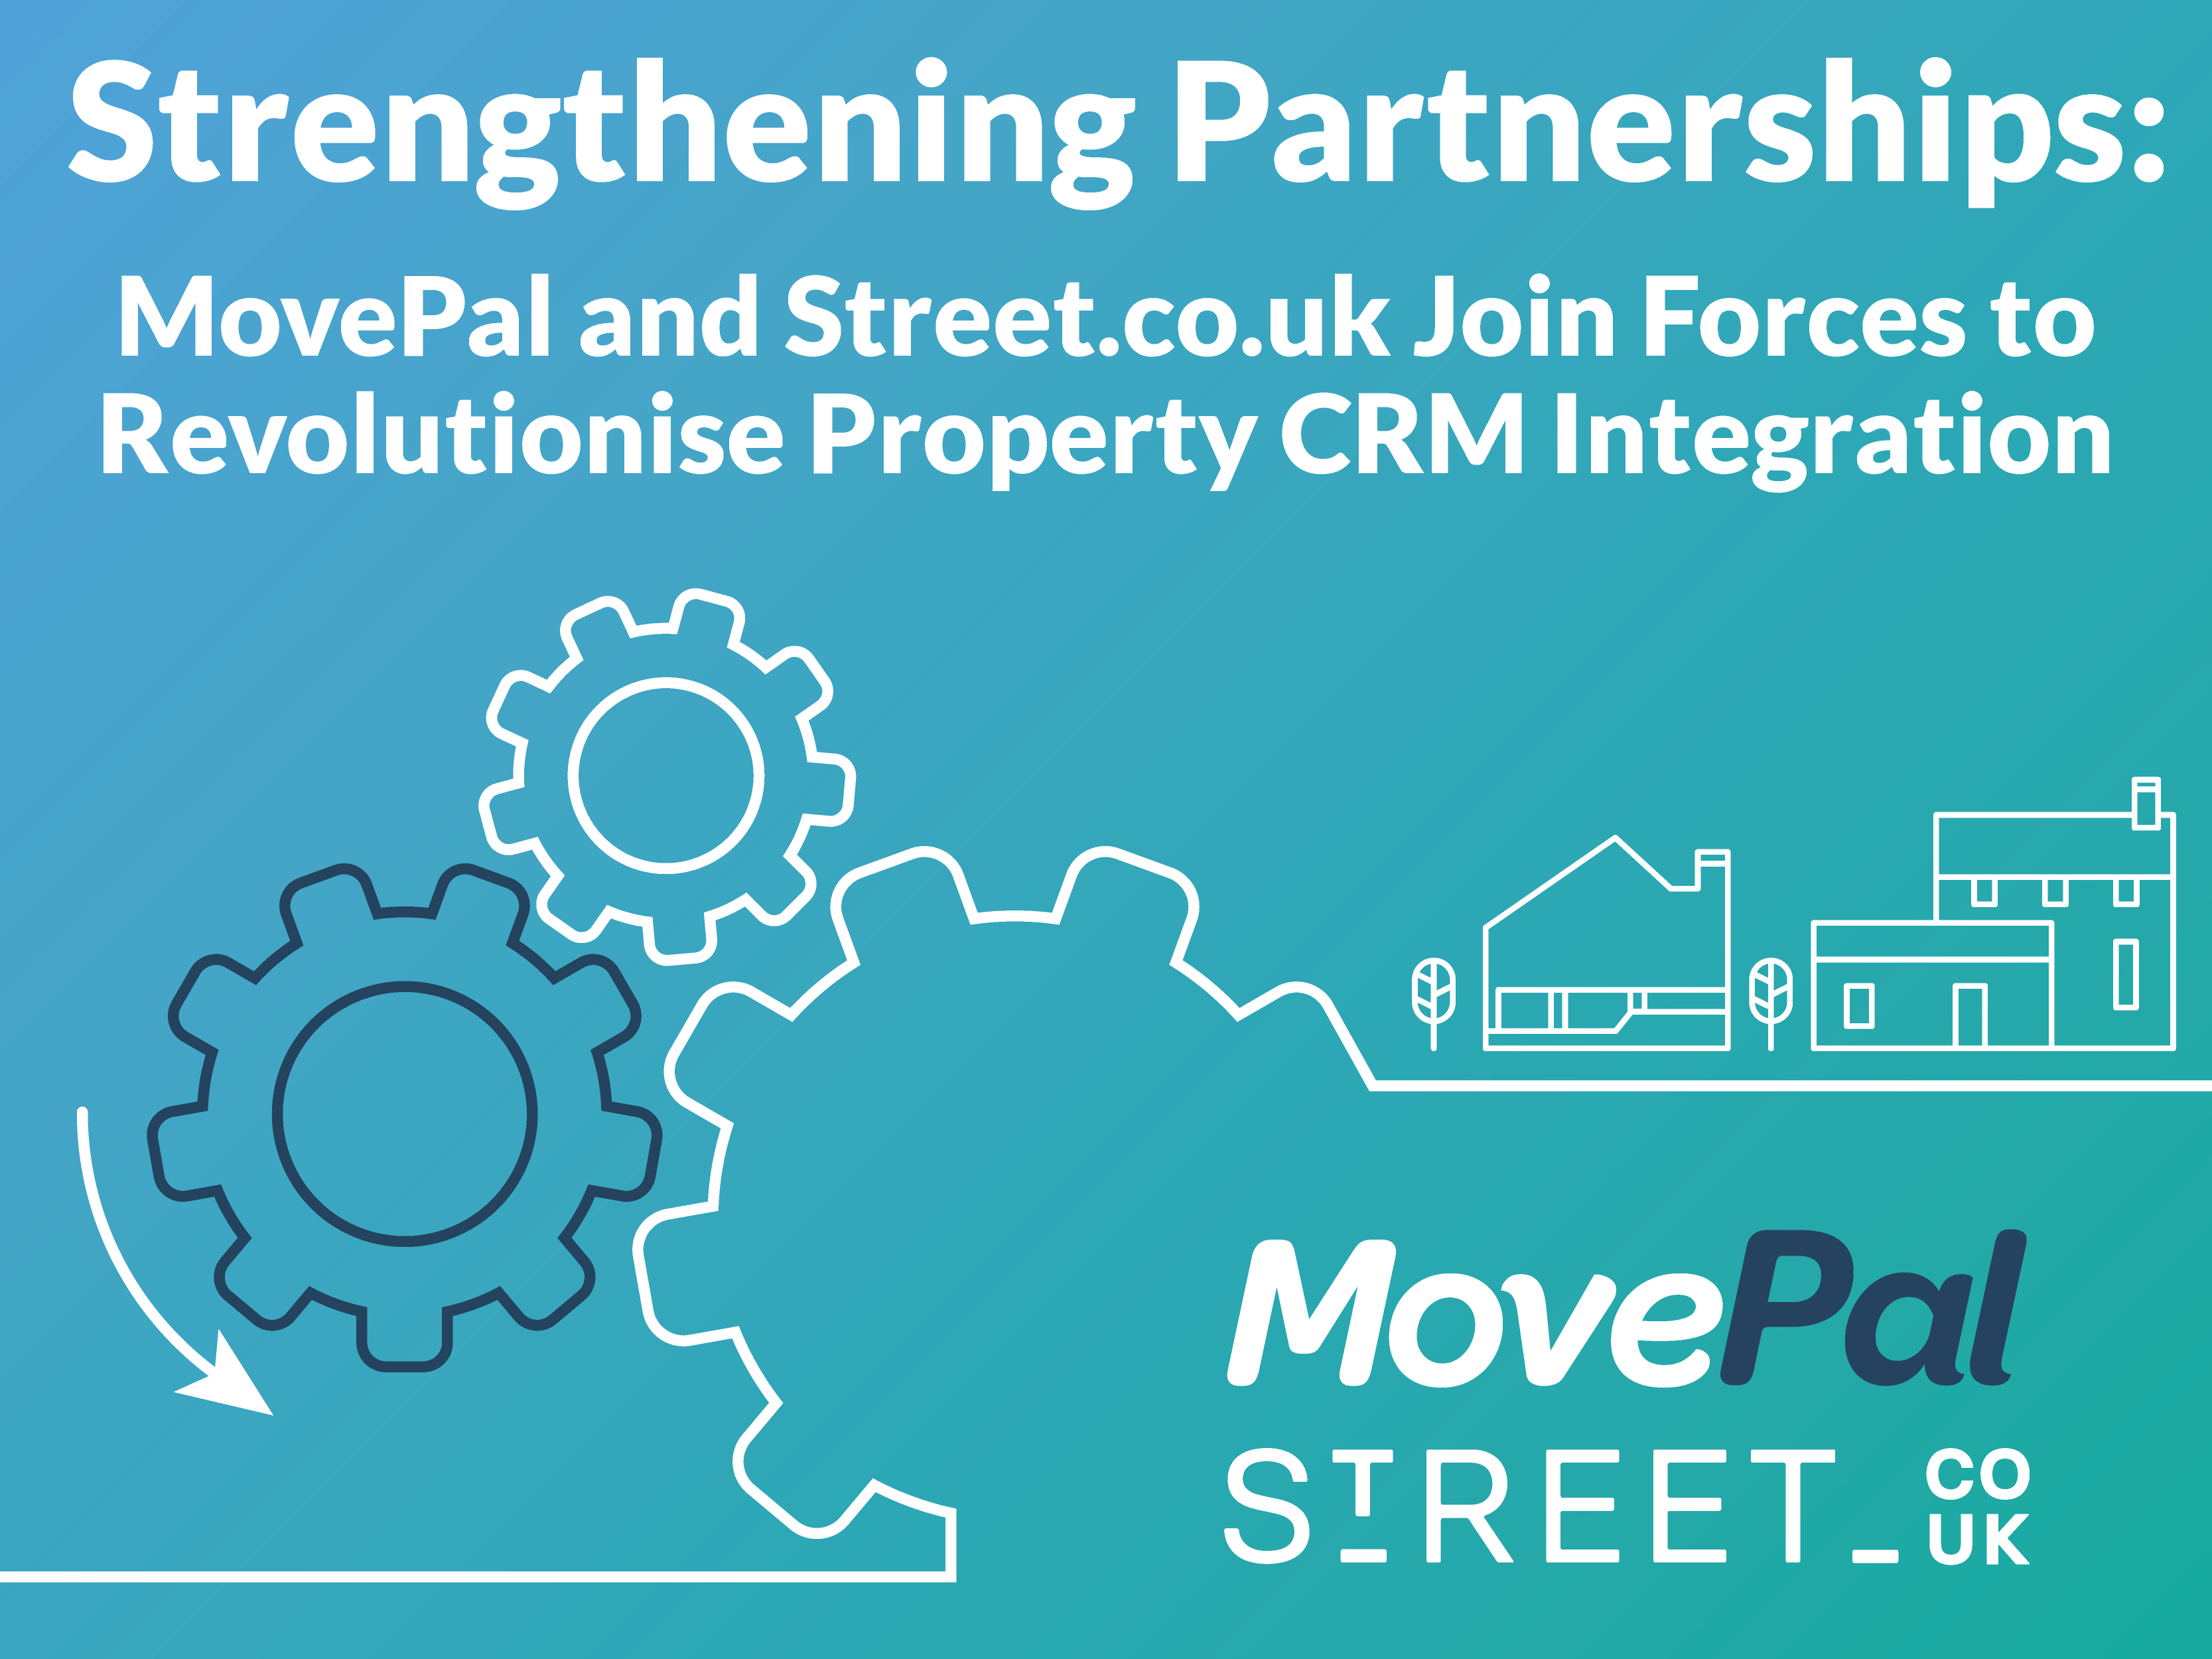 Strengthening Partnerships: MovePal and Street.co.uk Join Forces to Revolutionise Property CRM Integration